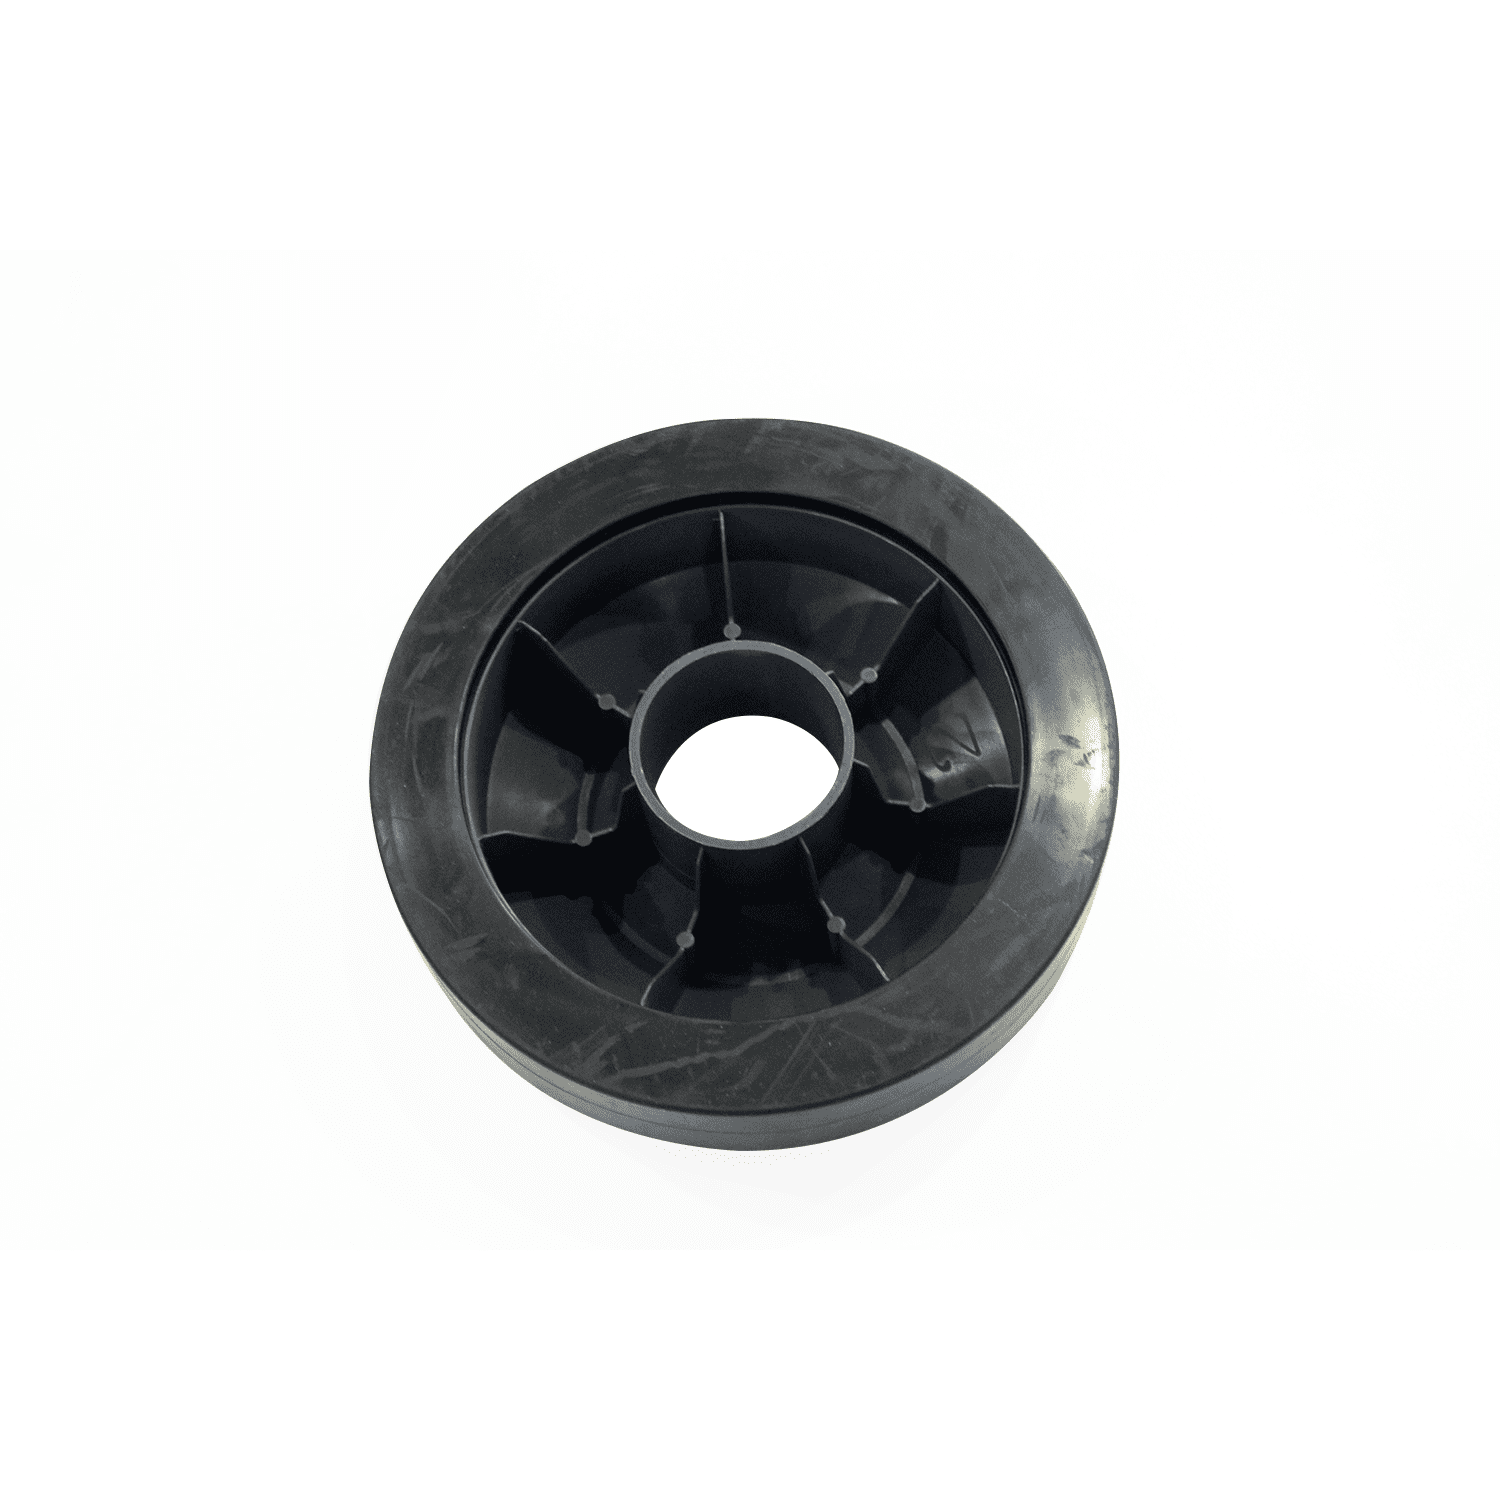 Caddy Wheel - 9980681, durable and reliable golf cart accessory.